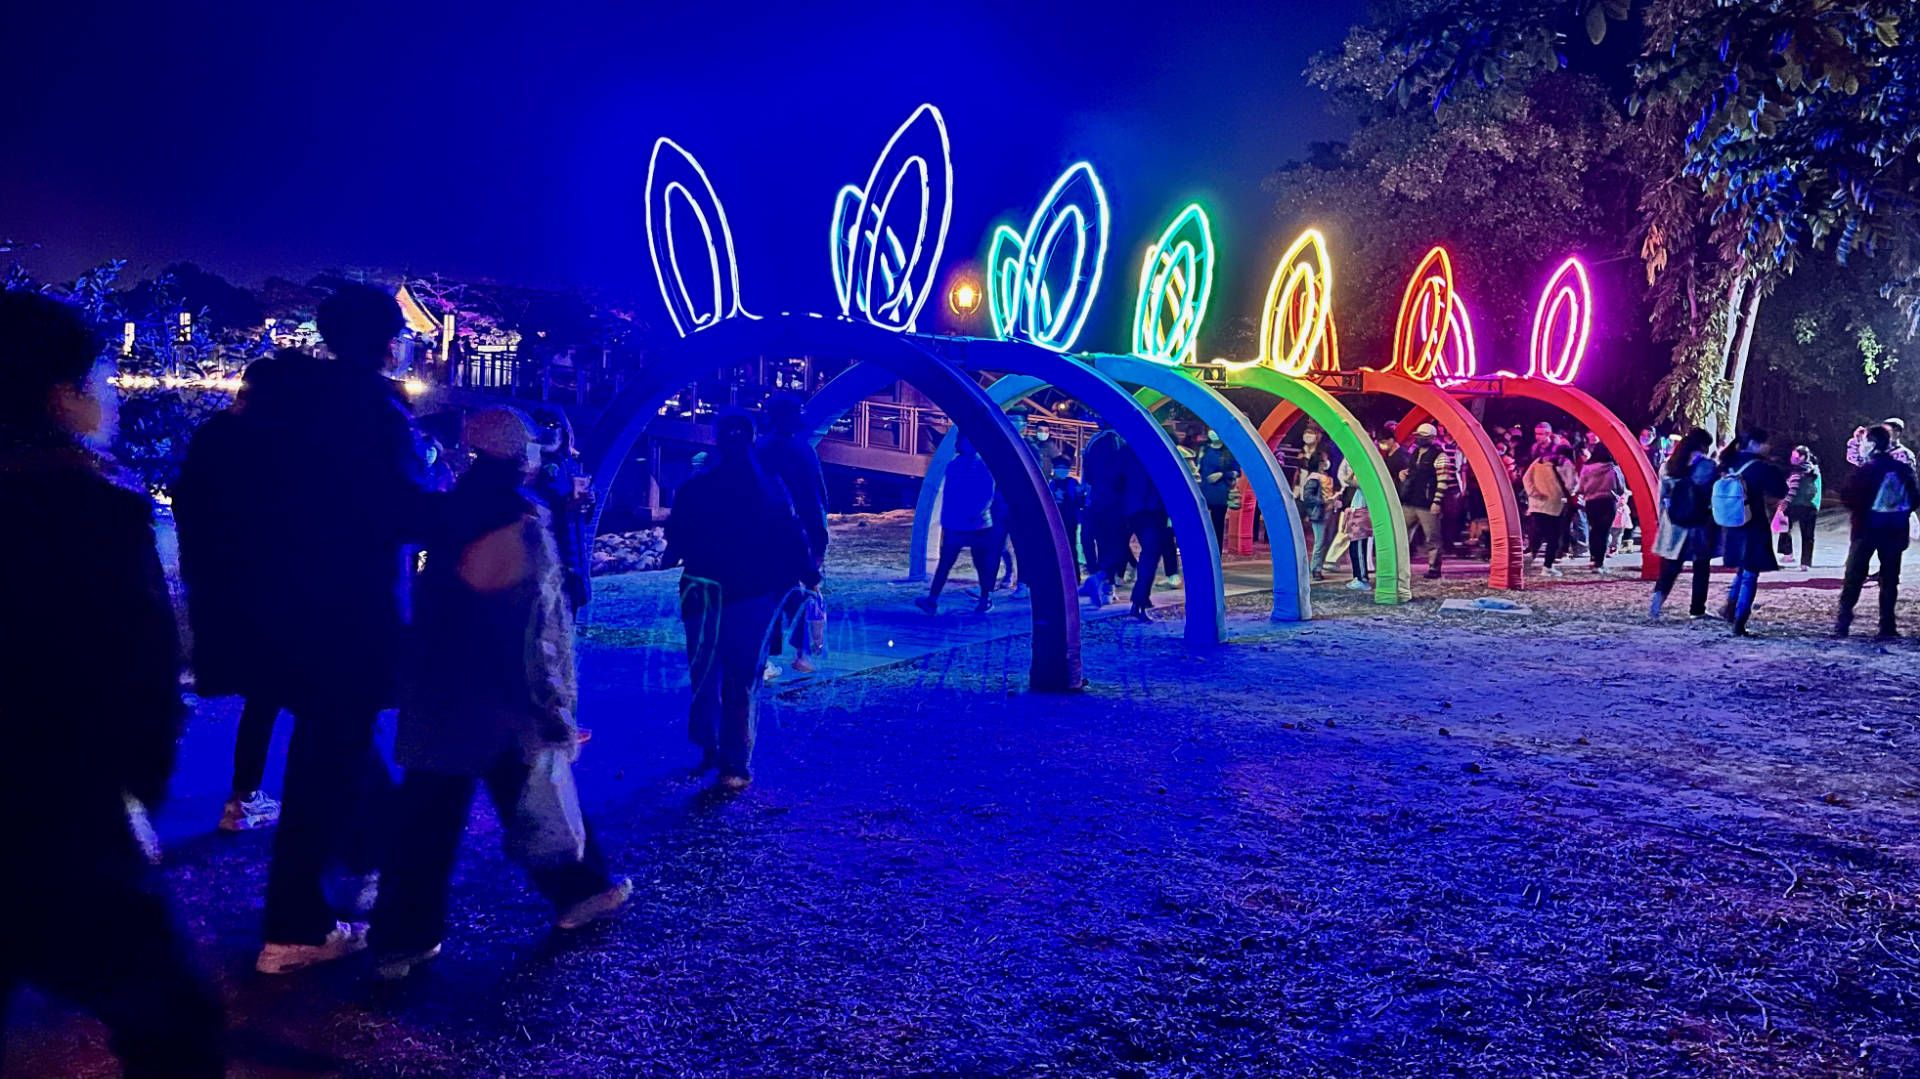 People walking through a sculpture of 7 sets of rabbit ears, illuminated in the colors of the rainbow.